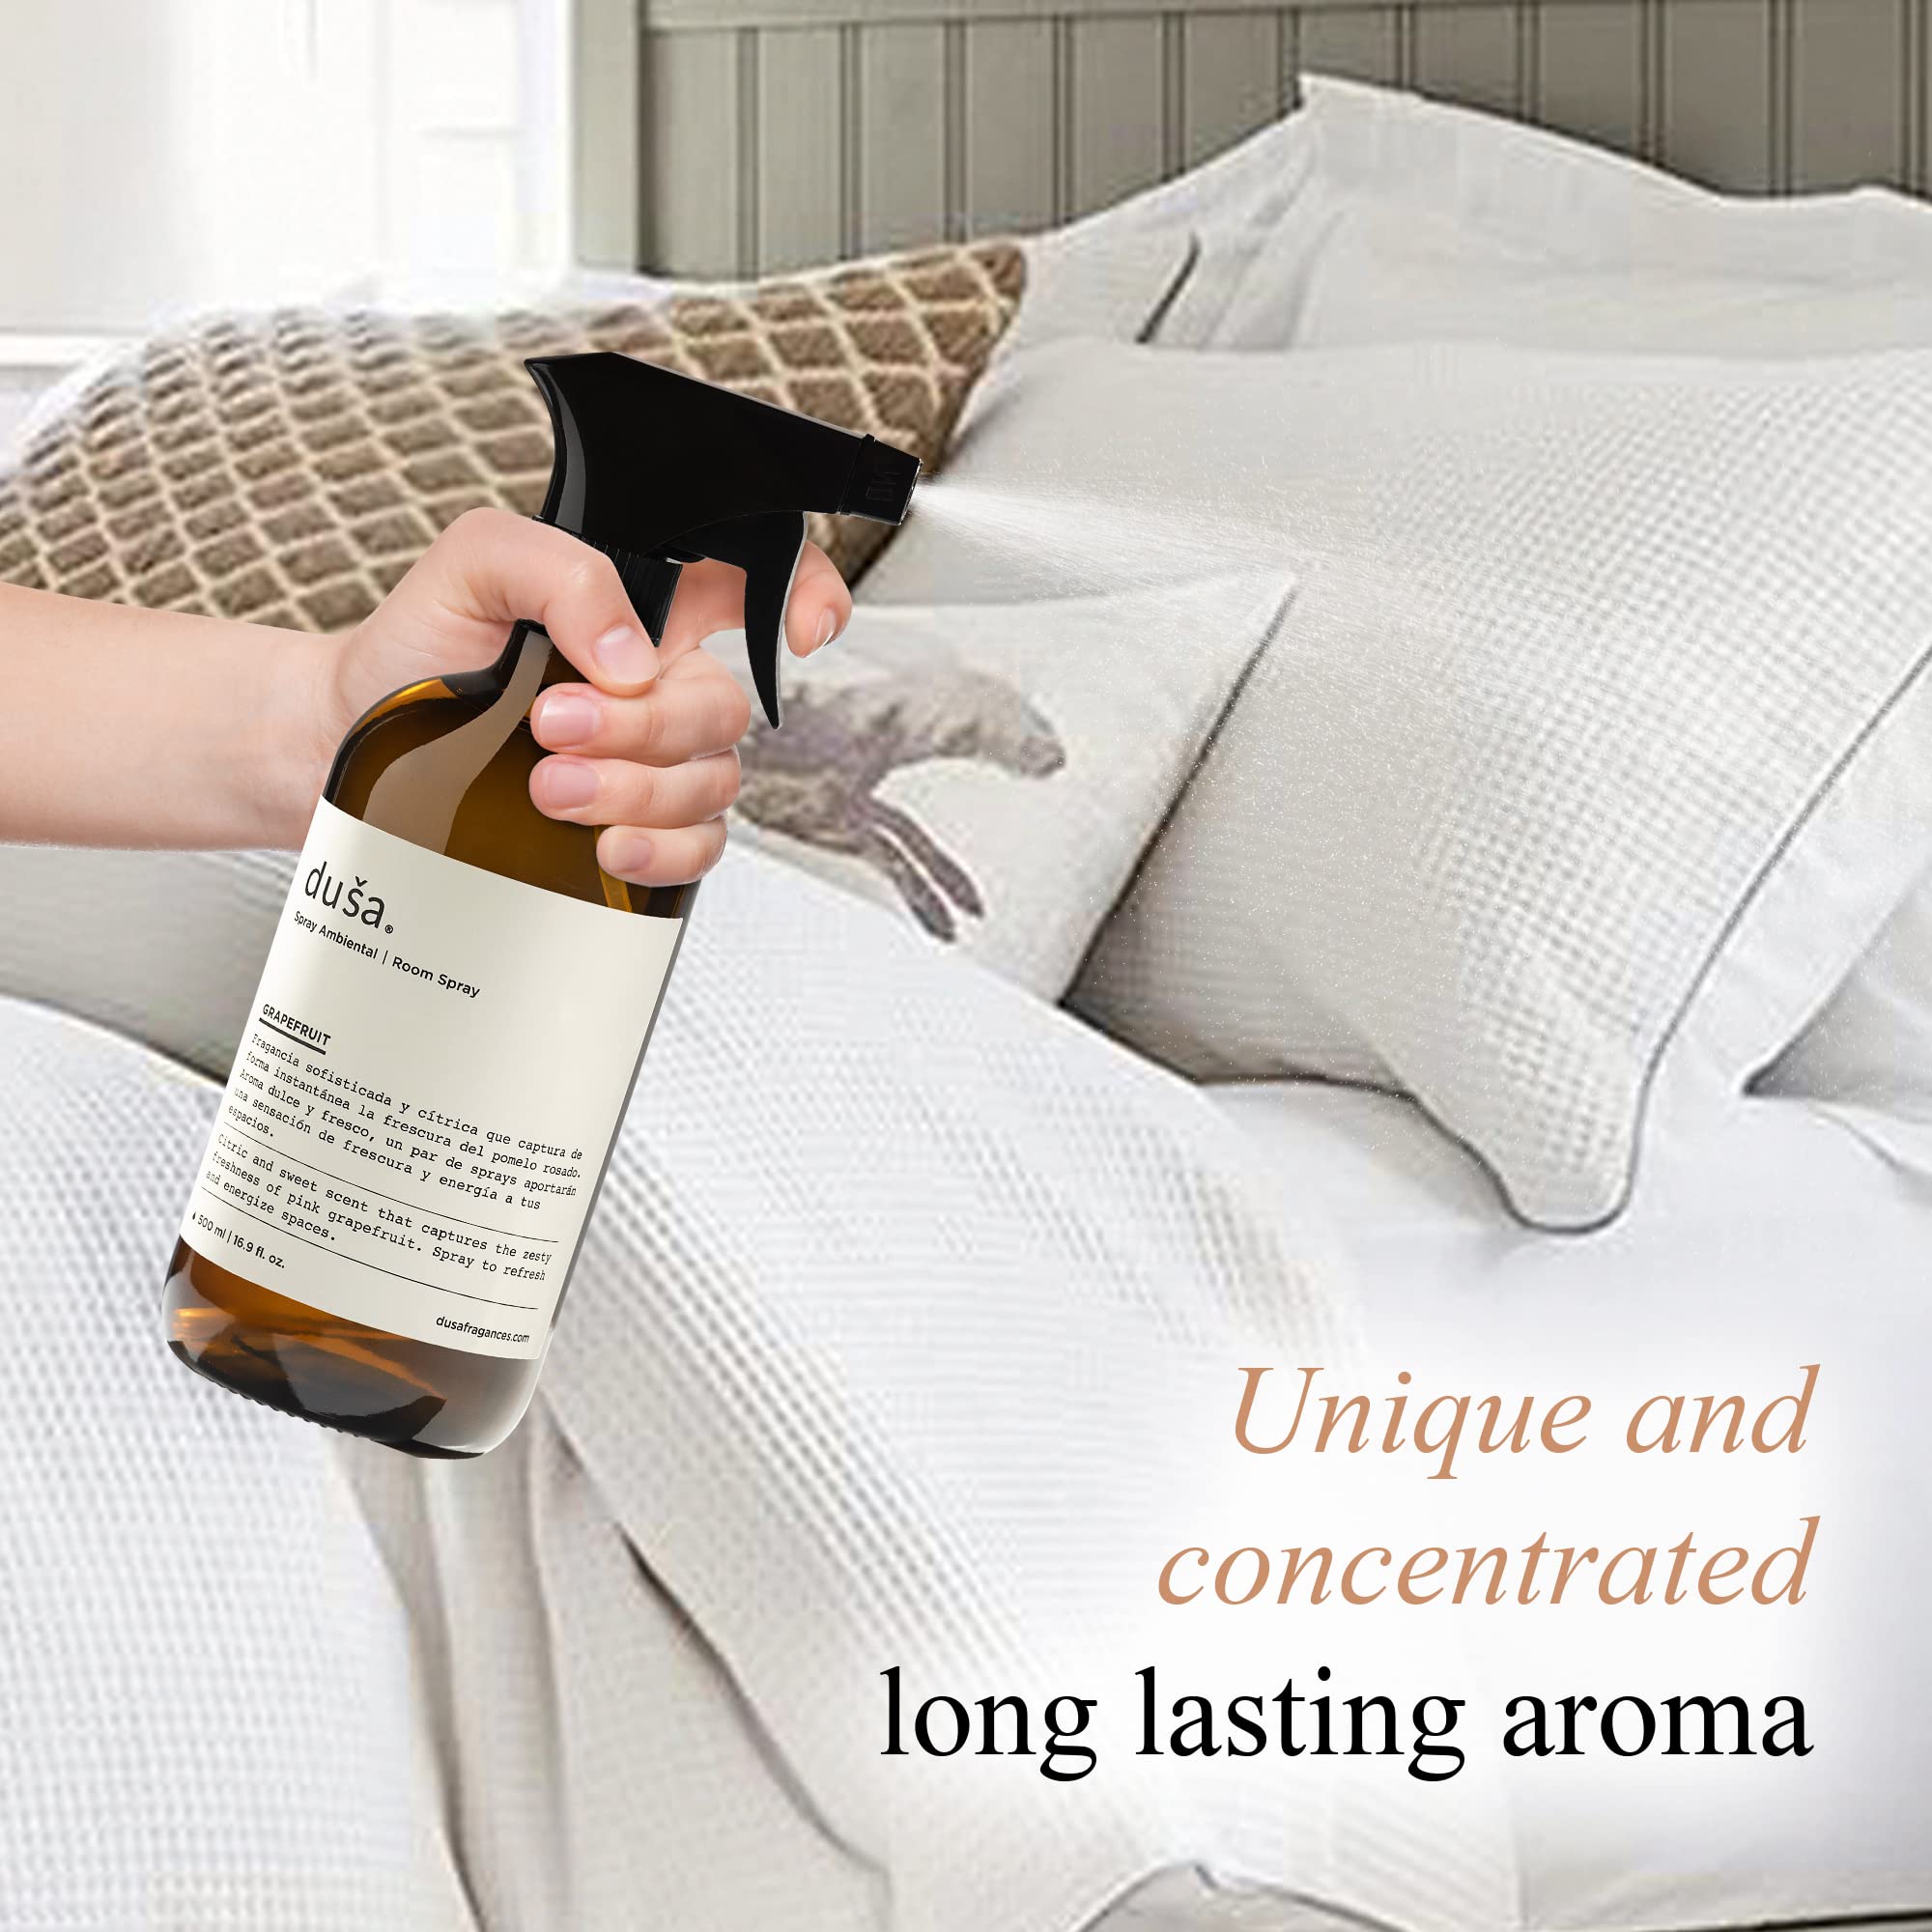 linen pillows sheets manly cotton room home long lasting calm luxury freshner fabric scent fragrance bedding water clothes launderess fresh scented oil essential eliminator sofa lino pallow almohada cheets niebla ctton air freshener spray bed mist